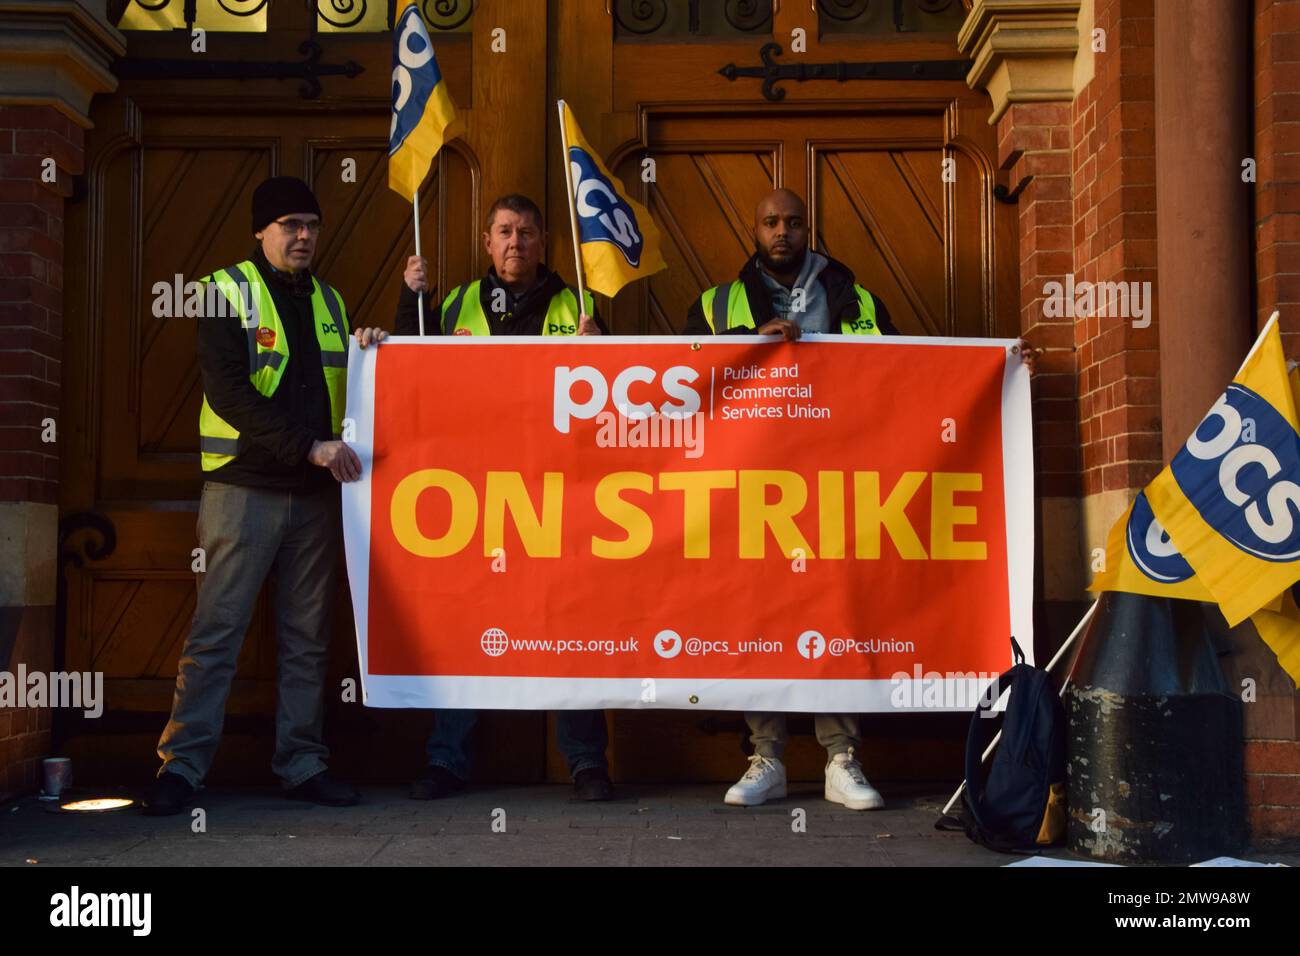 London, UK. 1st February 2023. PCS (Public and Commercial Services Union) picket outside St Pancras International Station, as Border Force workers go on strike. The day has seen around half a million people staging walkouts around the UK, including teachers, university staff, public service workers and train drivers. Stock Photo